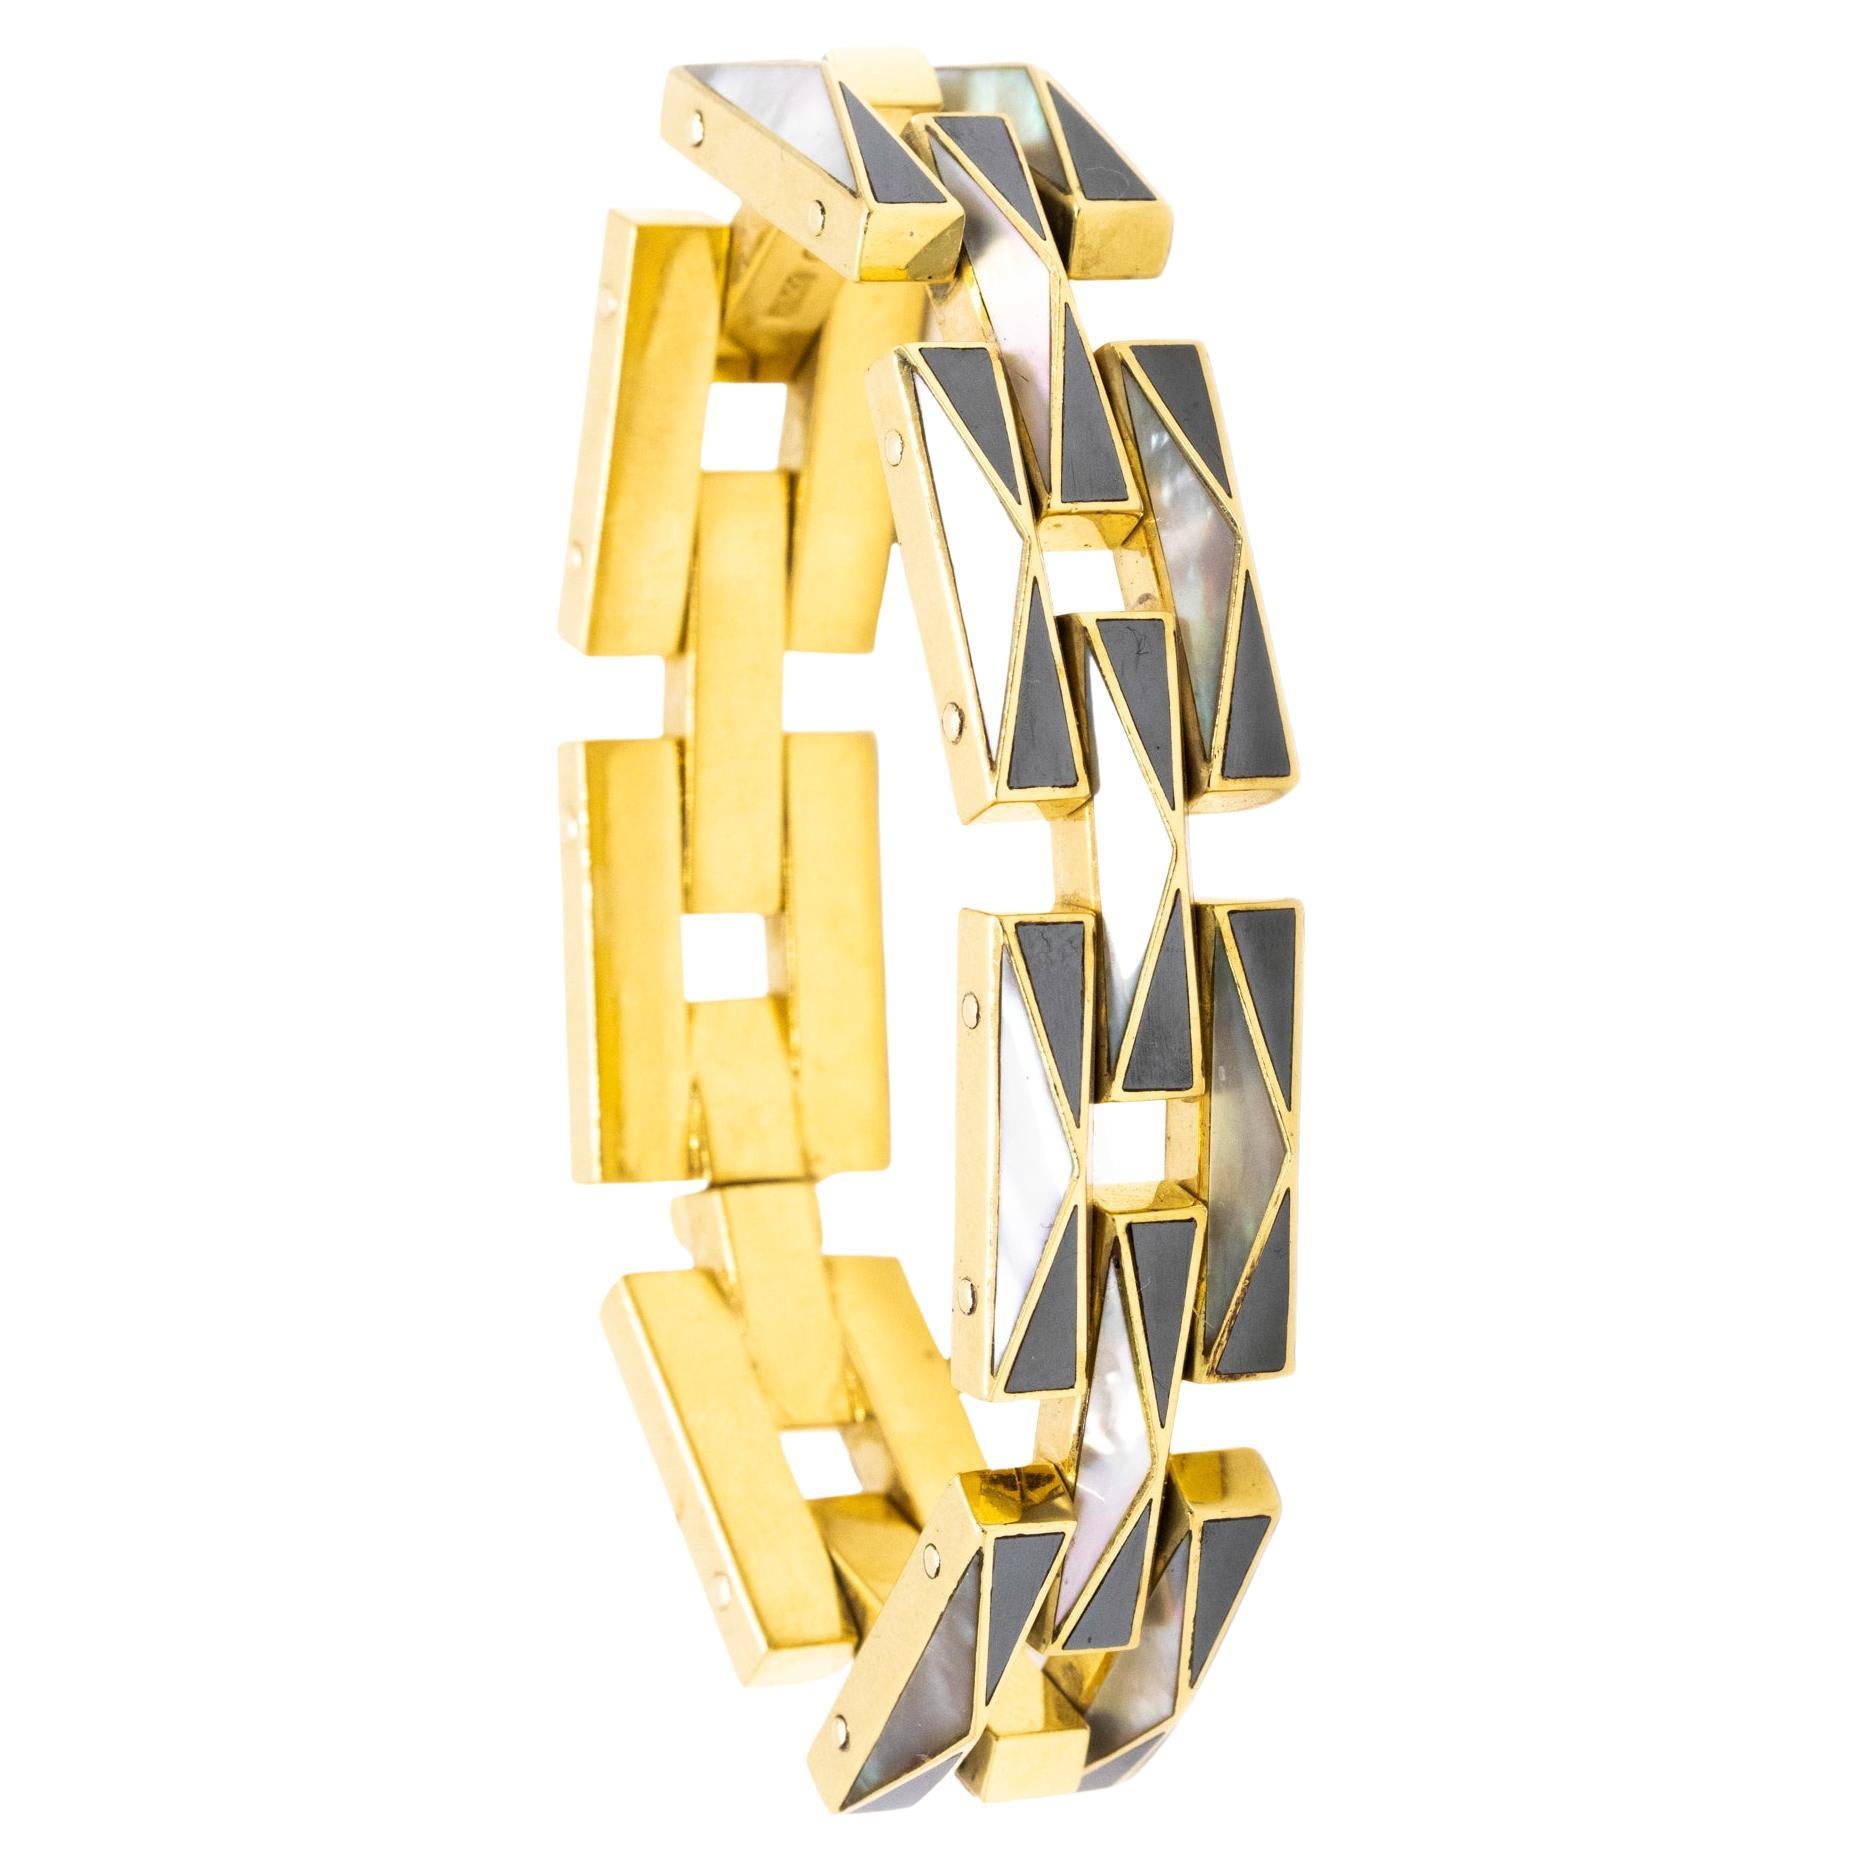 Tiffany And Co. 1982 Angela Cummings Geometric Bracelet 18Kt Gold Inlaid Carving